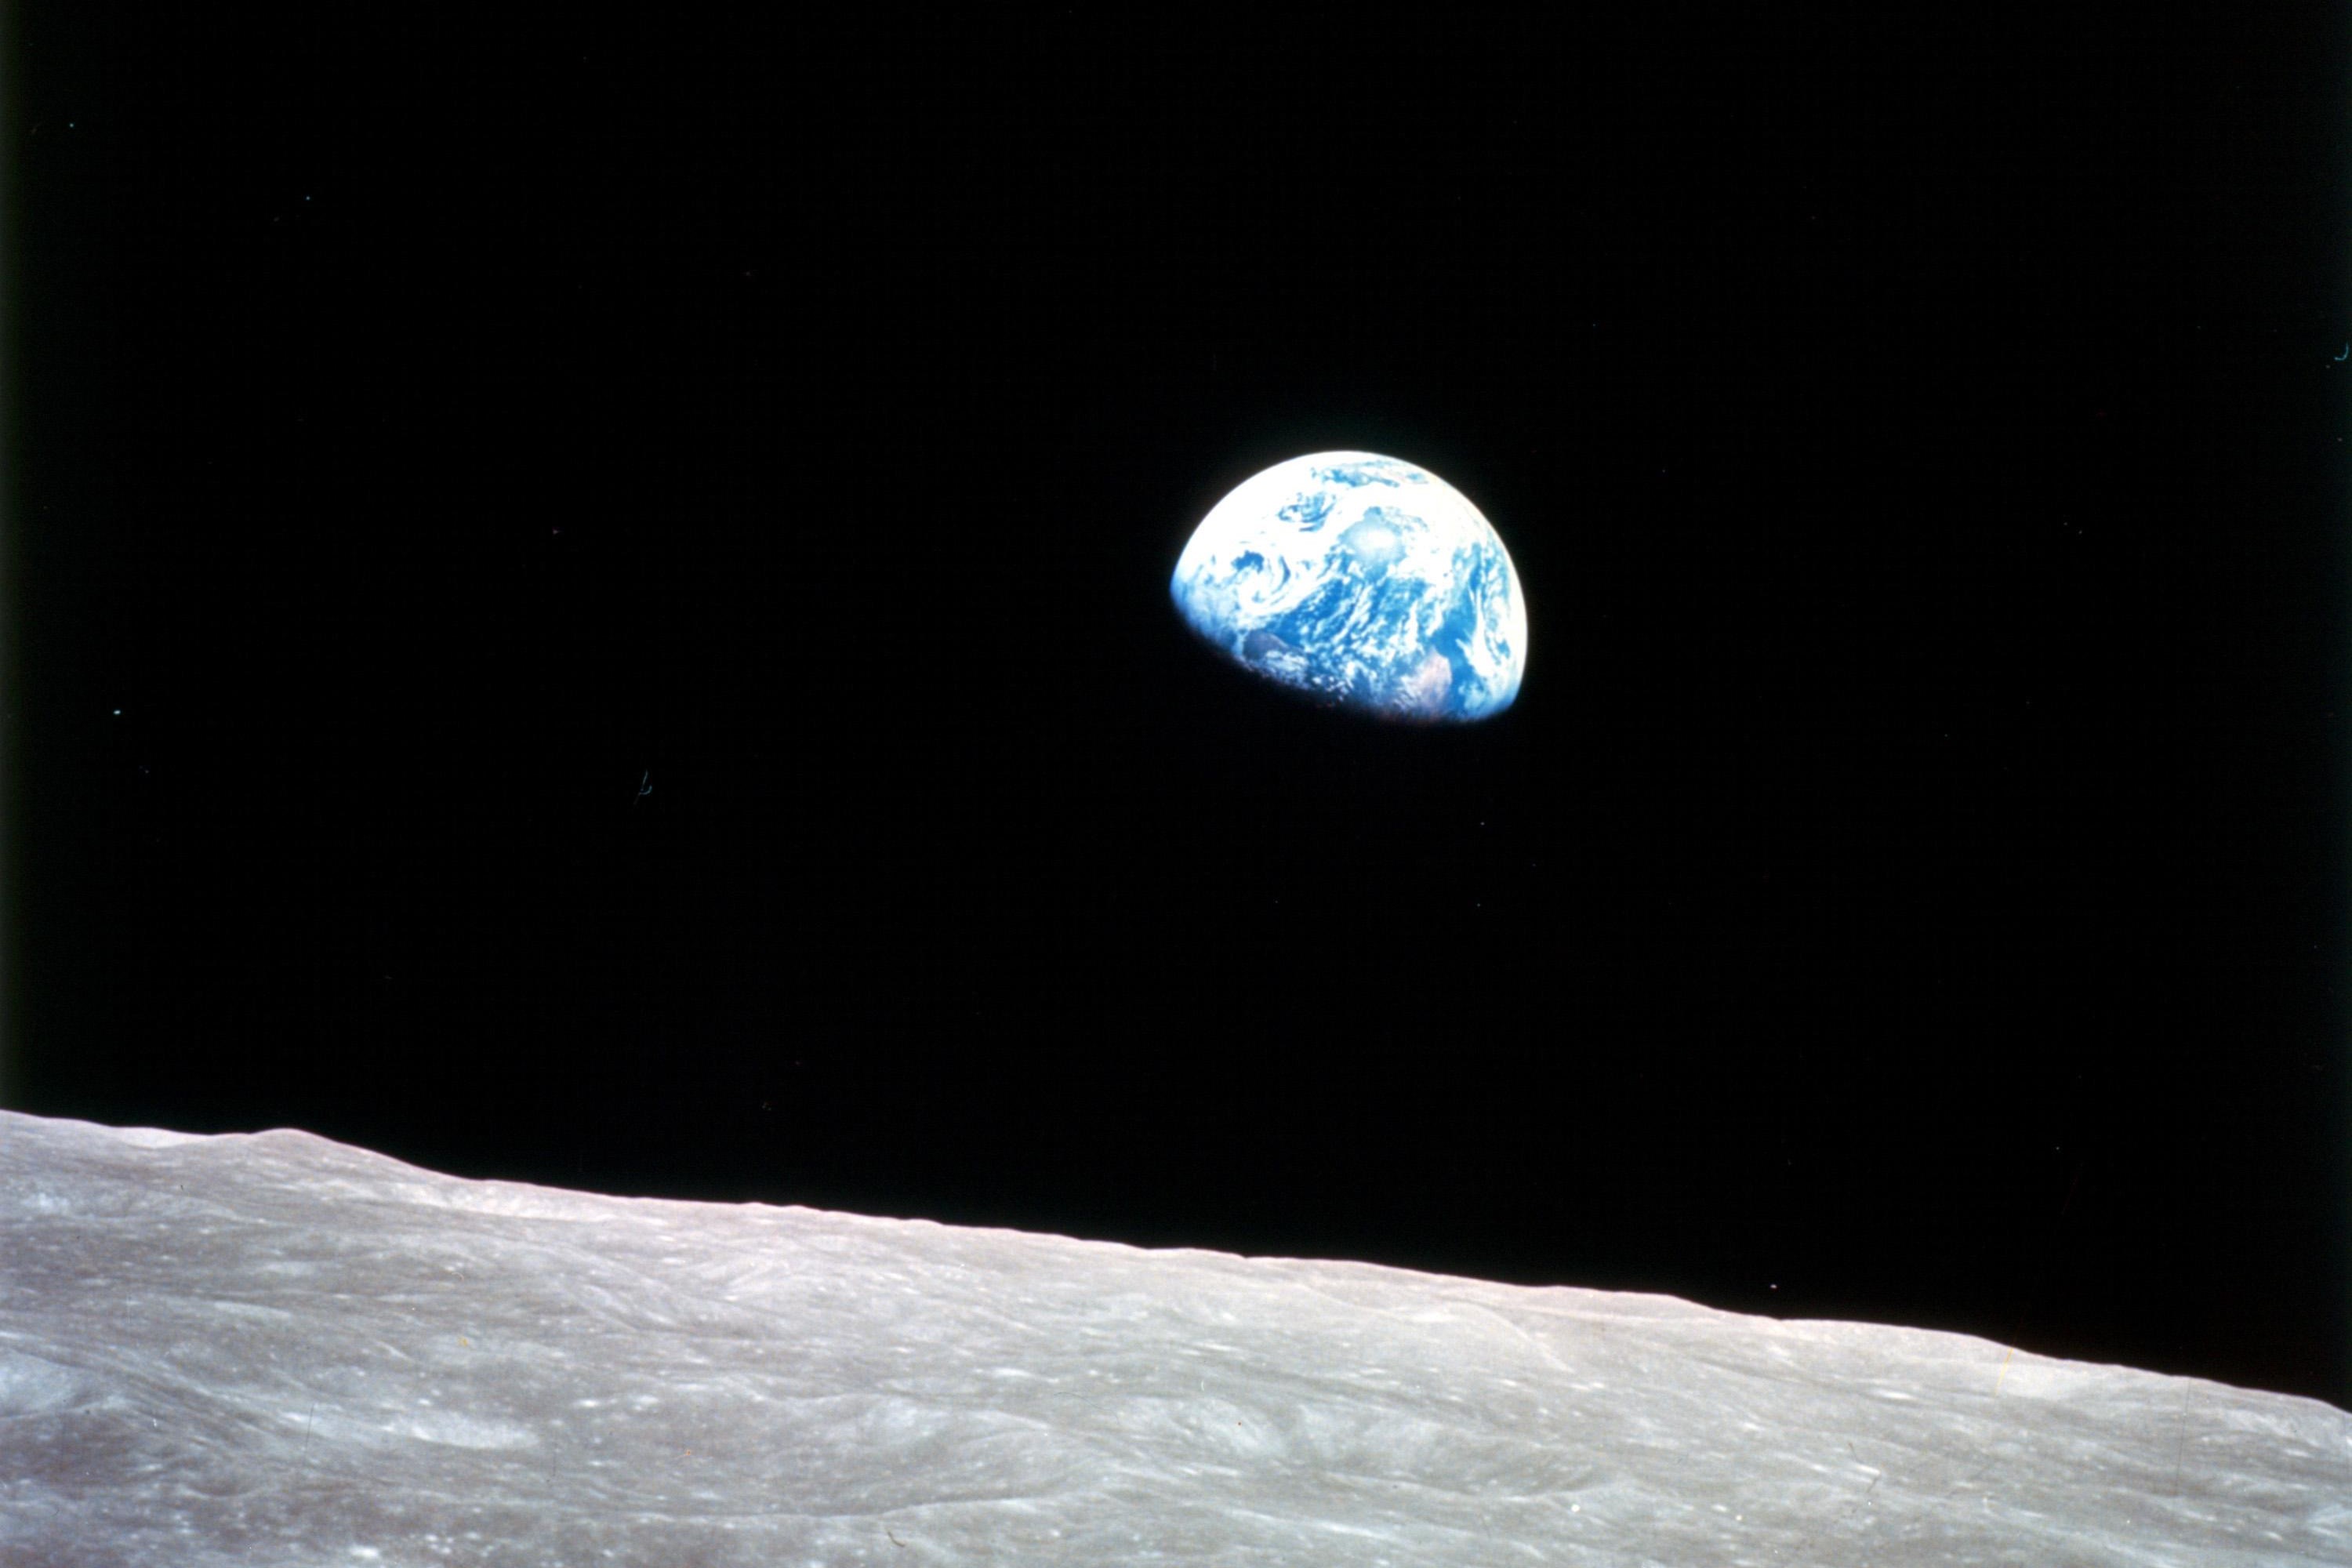 The Earth seen from the surface of the moon